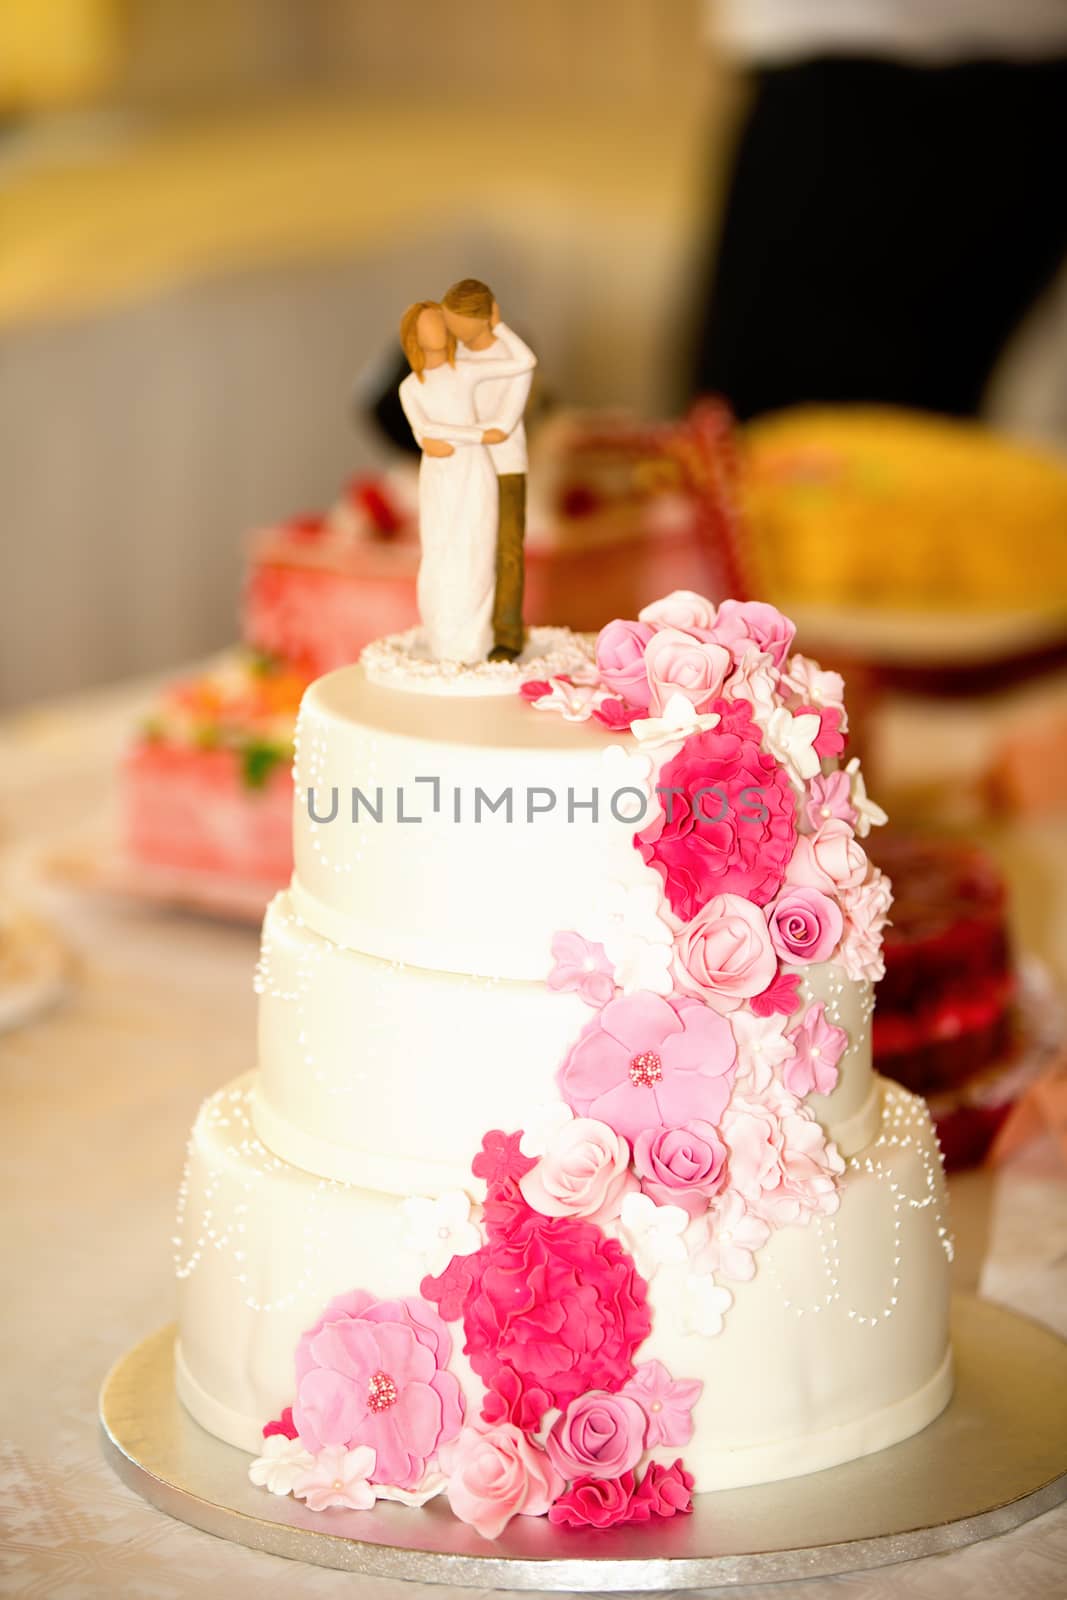 A wedding cake beautifully decorated with flowers by 25ehaag6